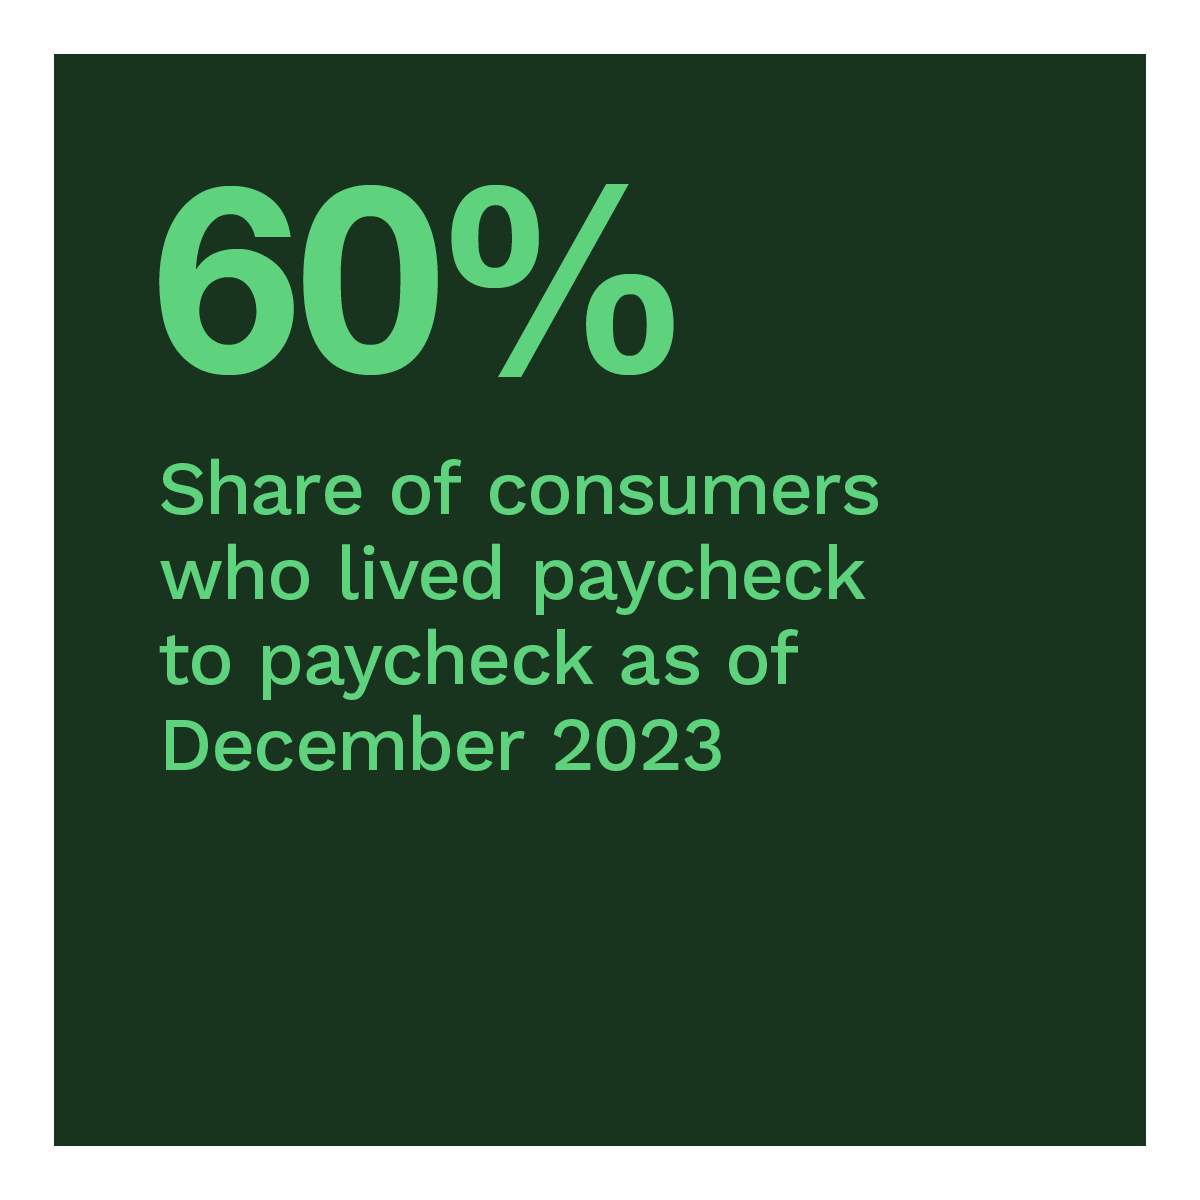 60%: Share of consumers who lived paycheck to paycheck as of December 2023